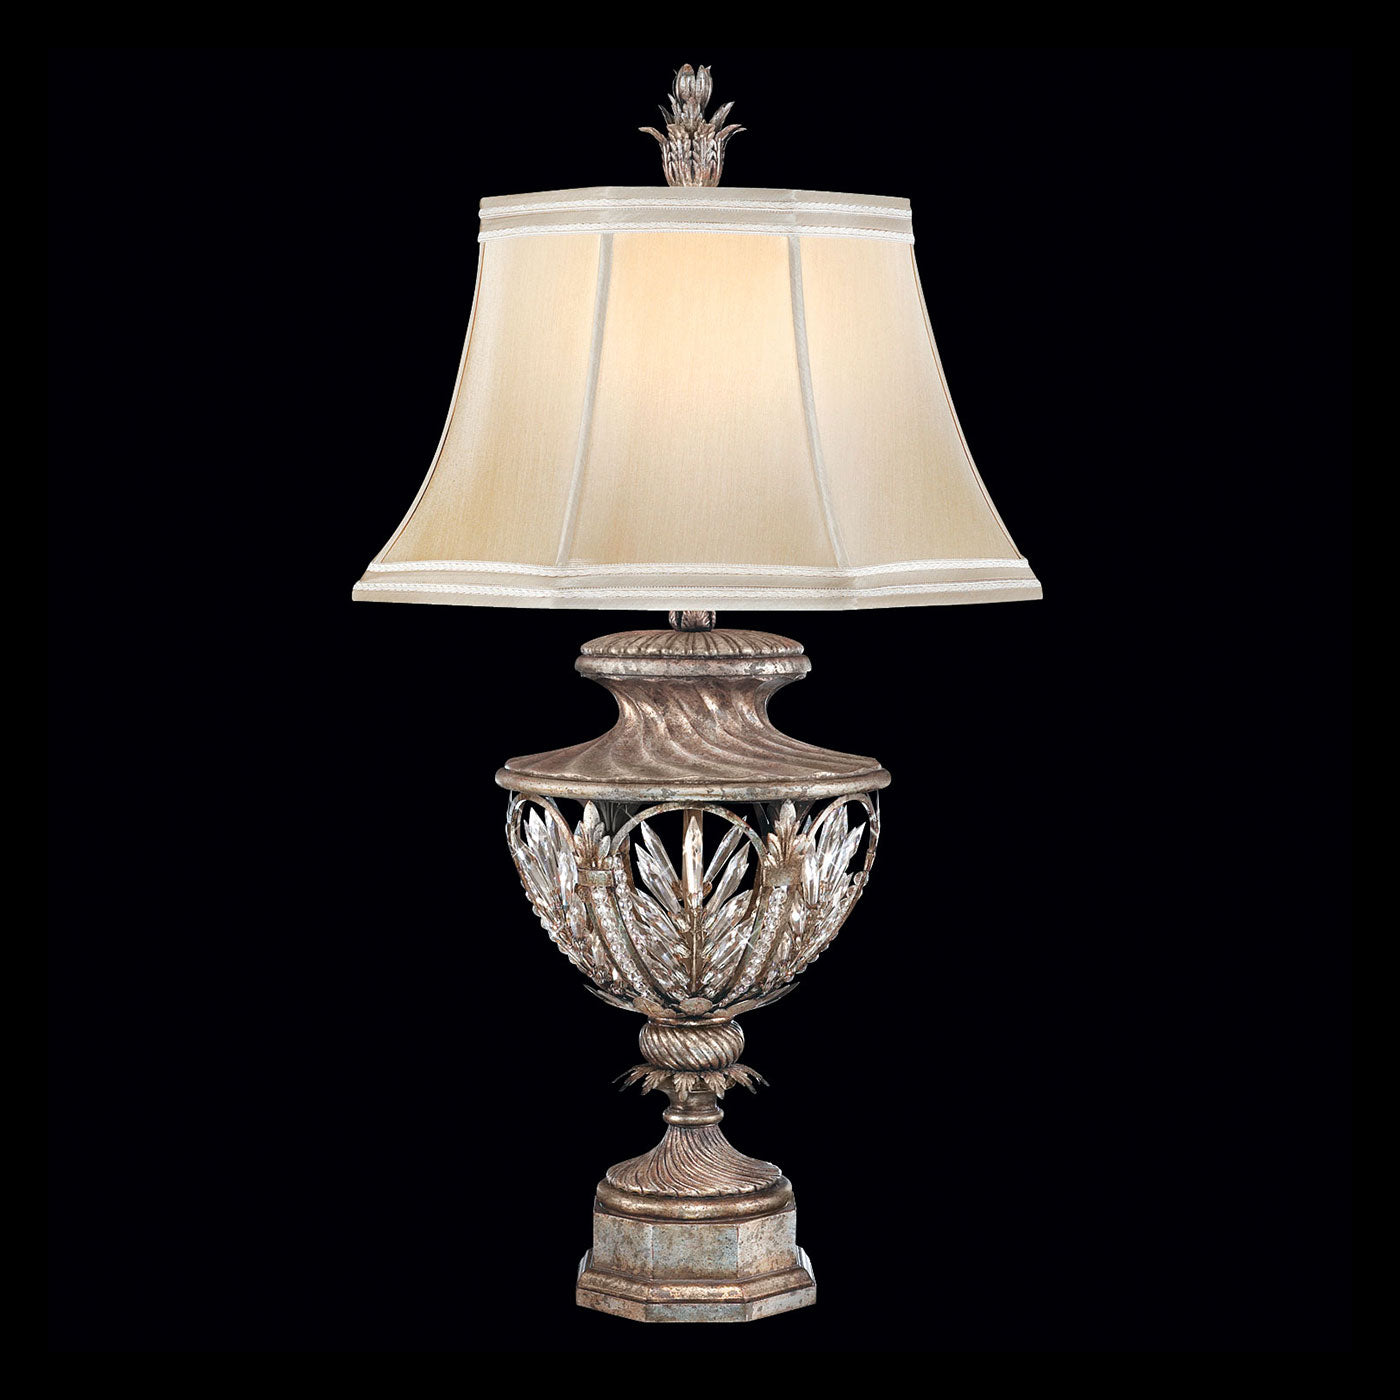 Fine Art Winter Palace 37" Table Lamp Lamp Fine Art Handcrafted Lighting Silver  